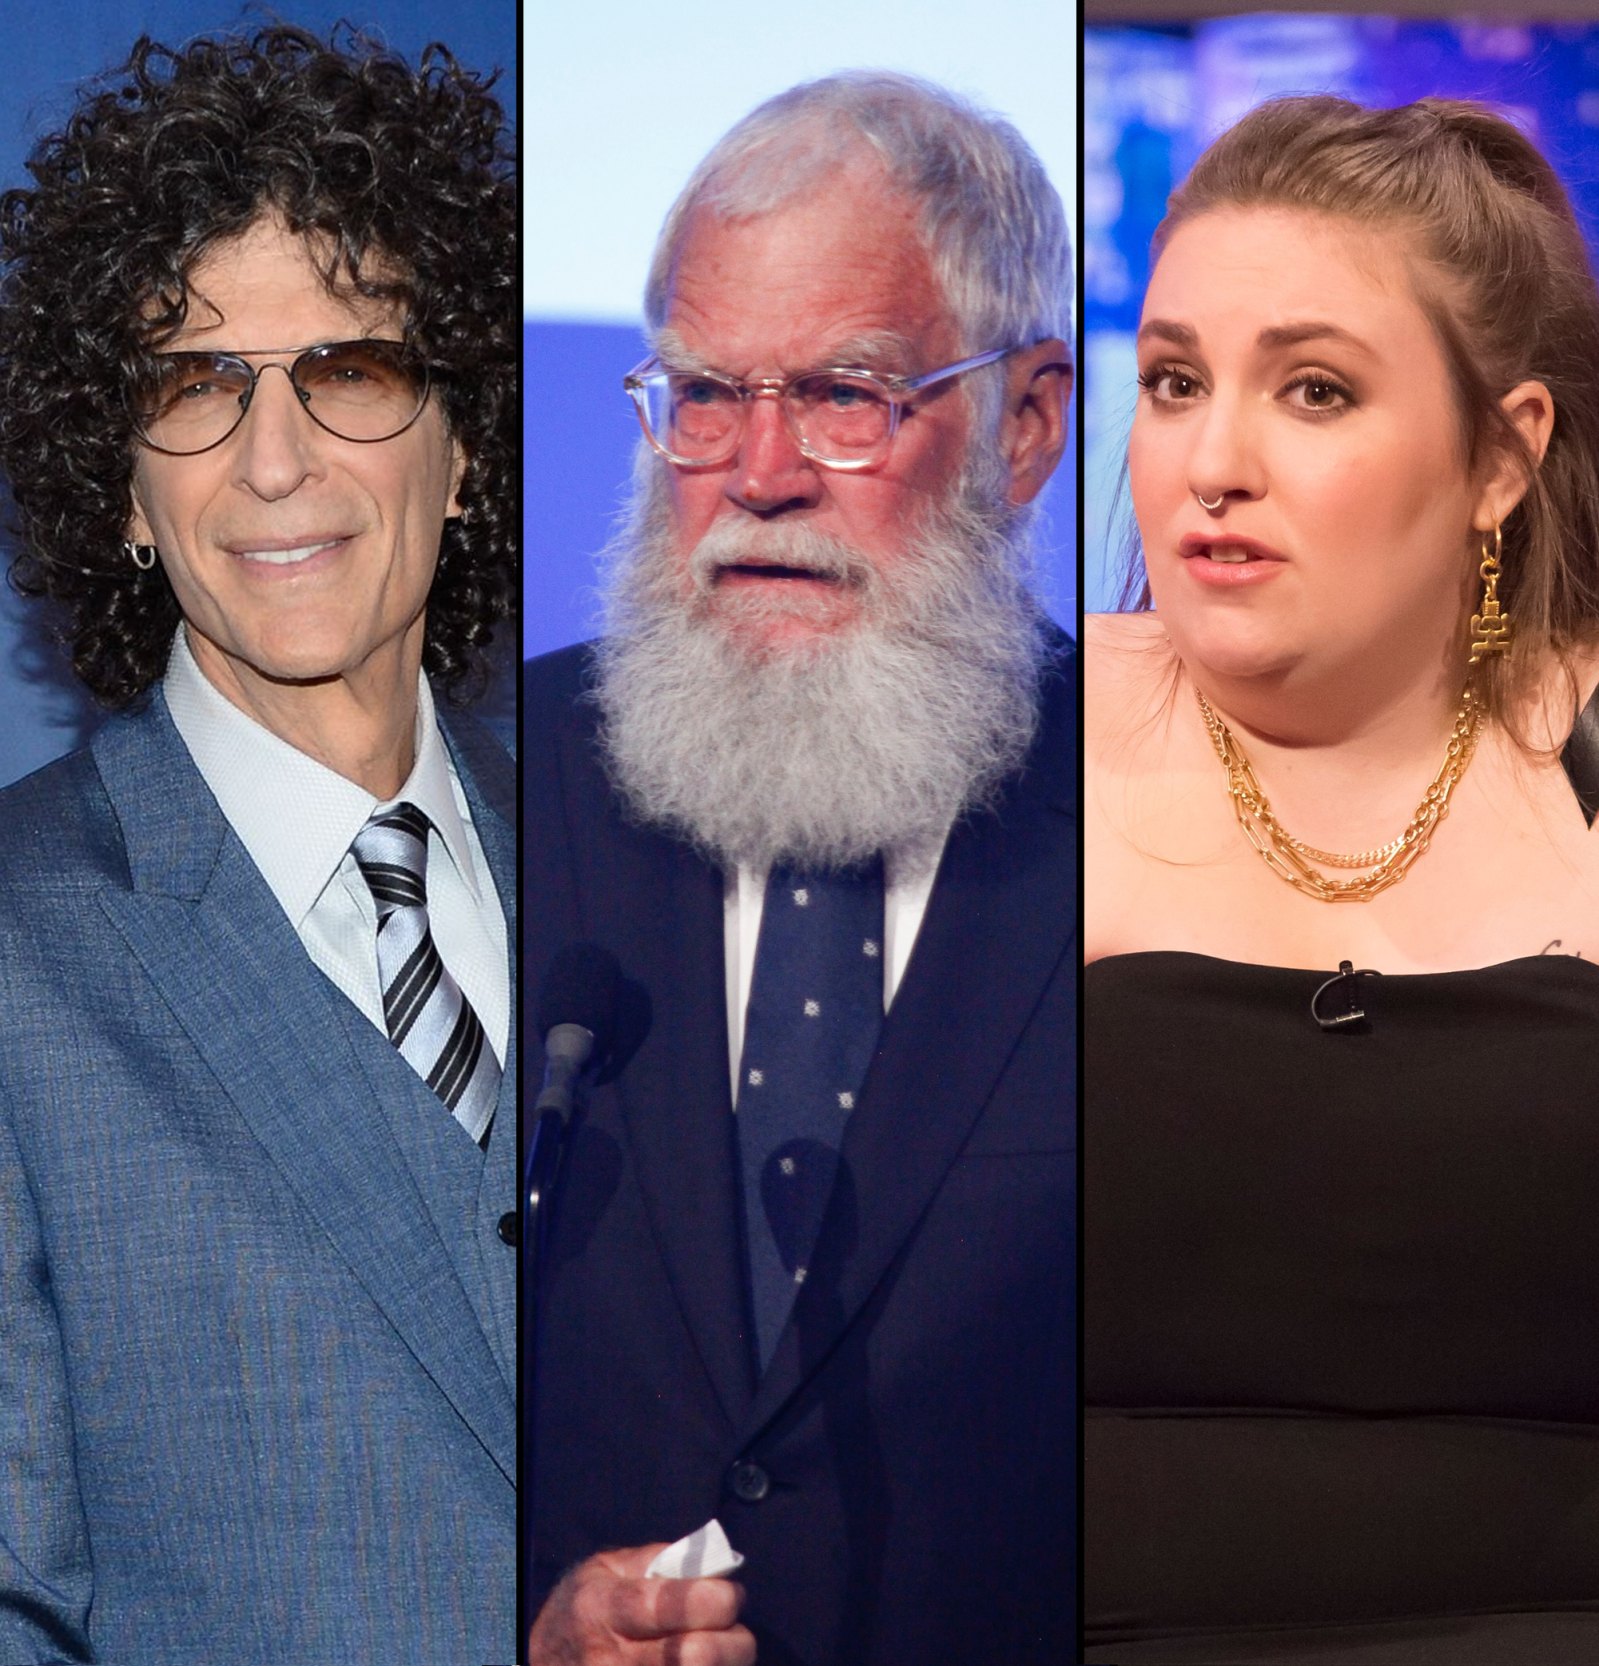 Howard Stern and His Biggest Celebrity Feuds Over the Years: David Letterman, Lena Dunham and More